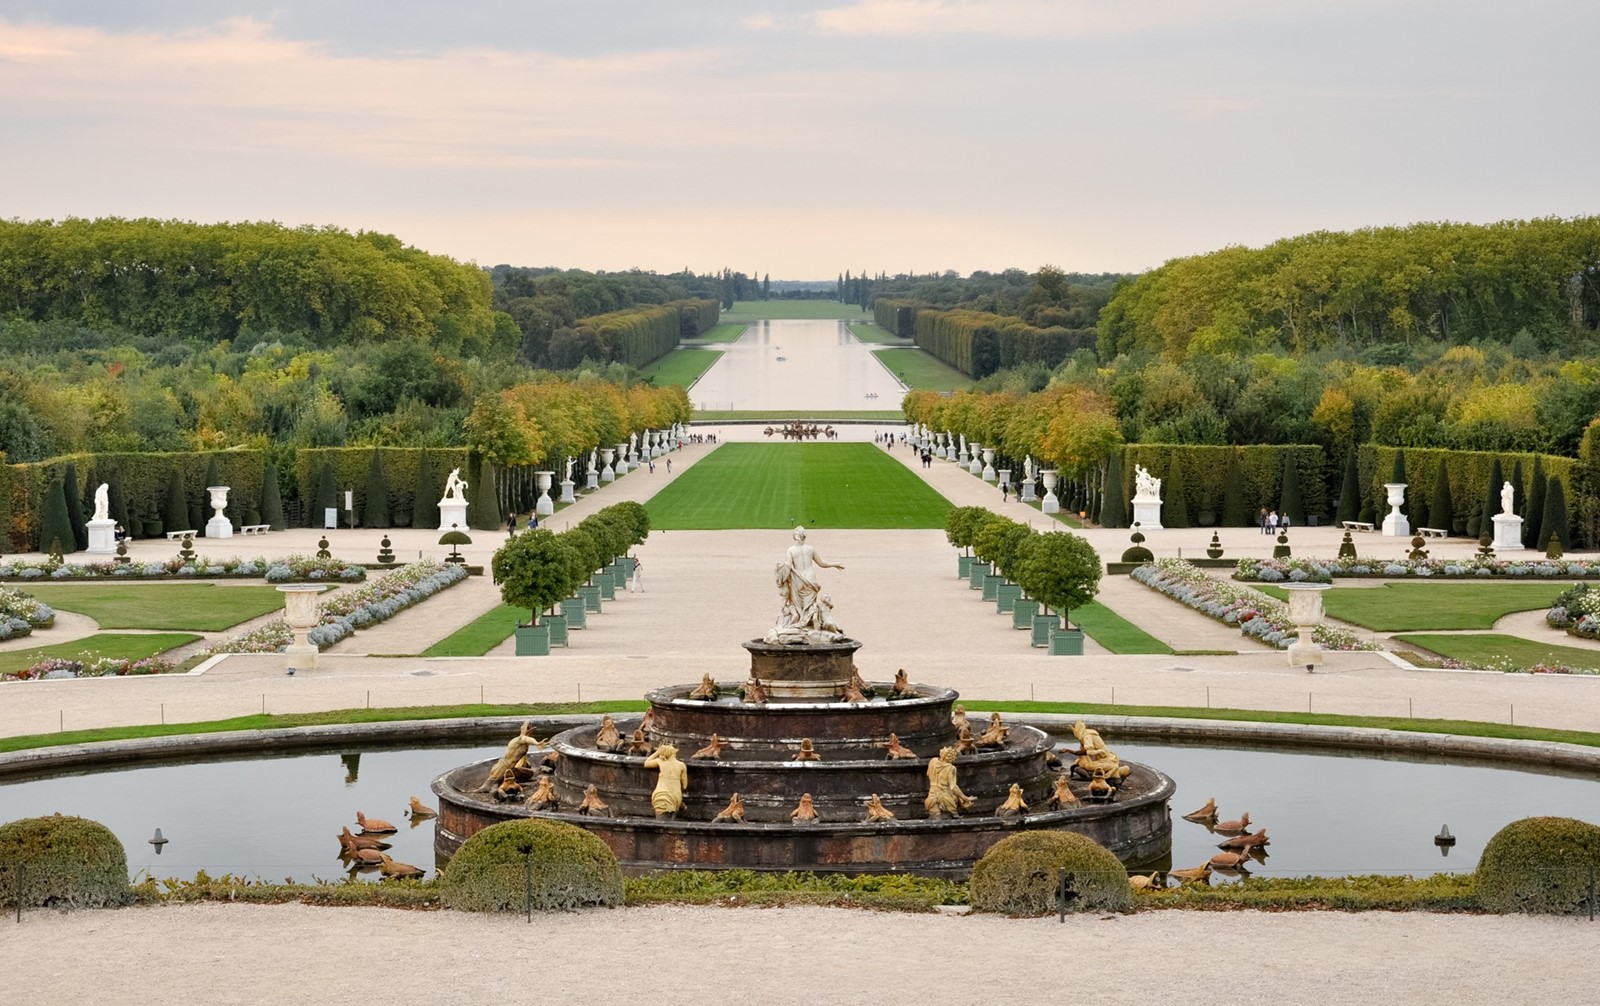 The Gardens of the Palace of Versailles, France